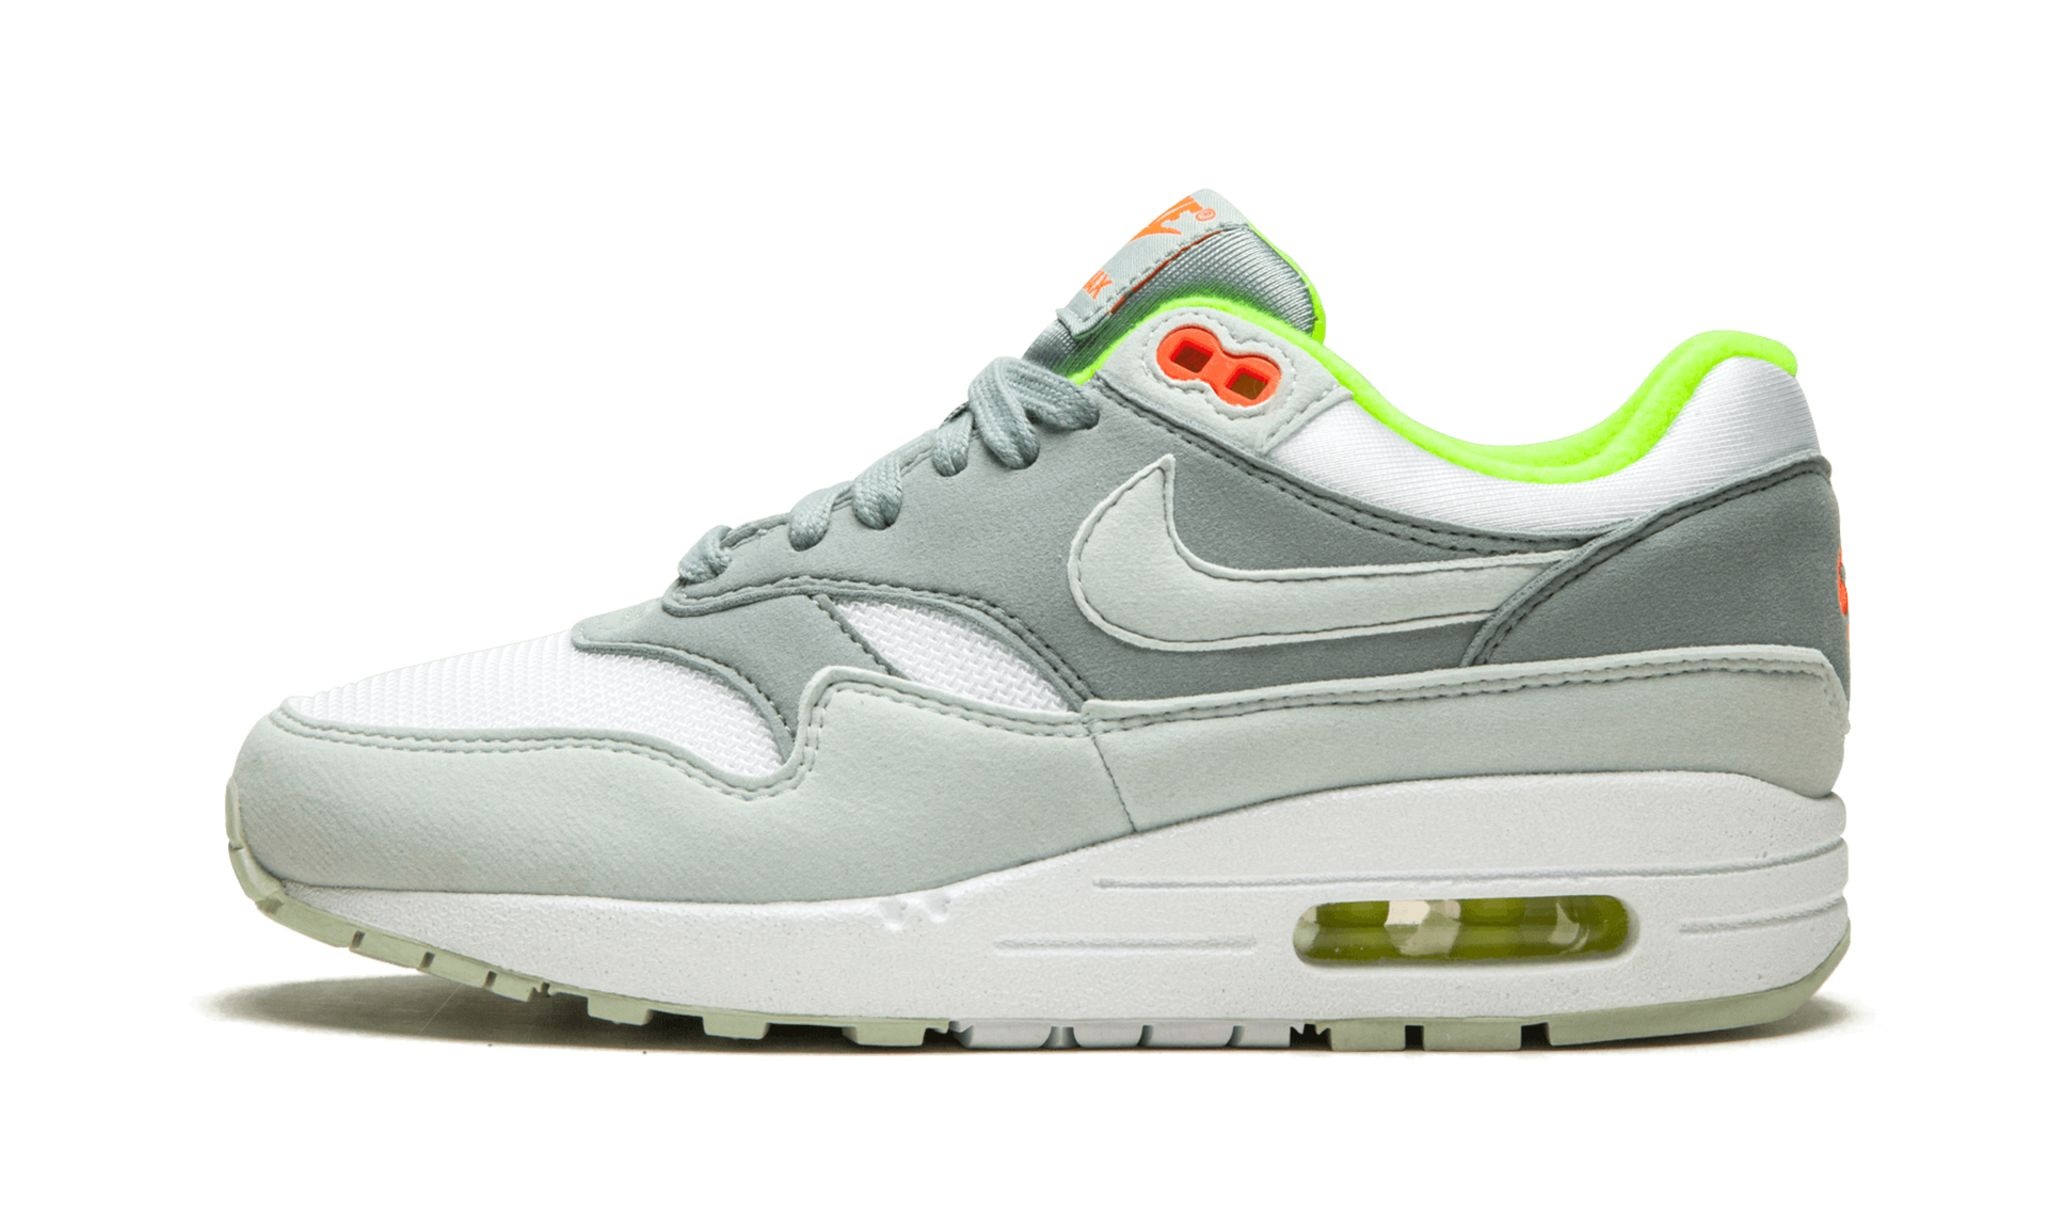 AIR MAX 1 WMNS "Barely Grey / Pumice" - 1